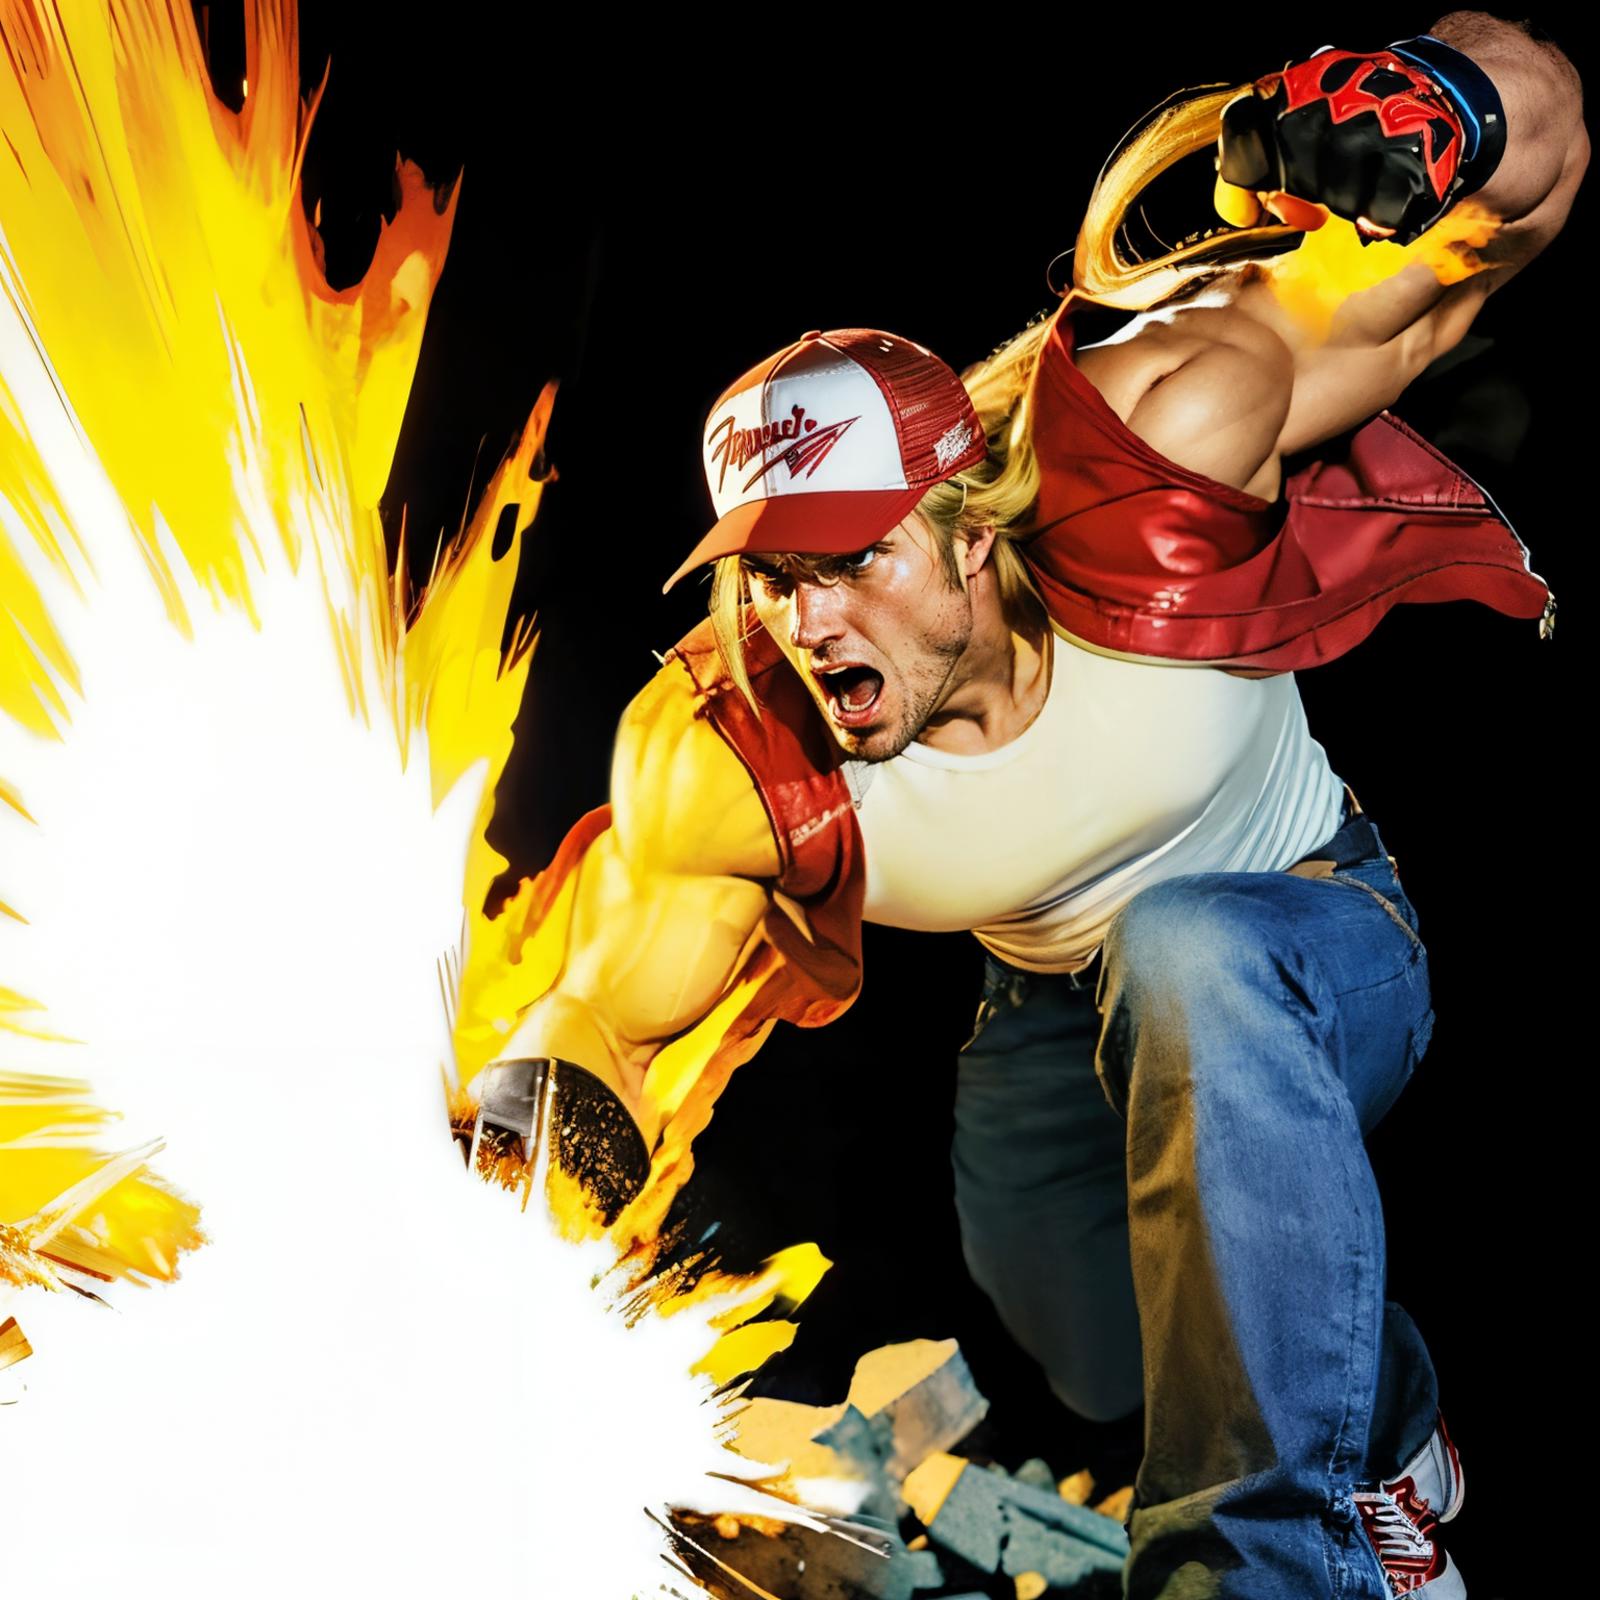 Terry Bogard (The King of Fighters) LoRA image by wikkitikki